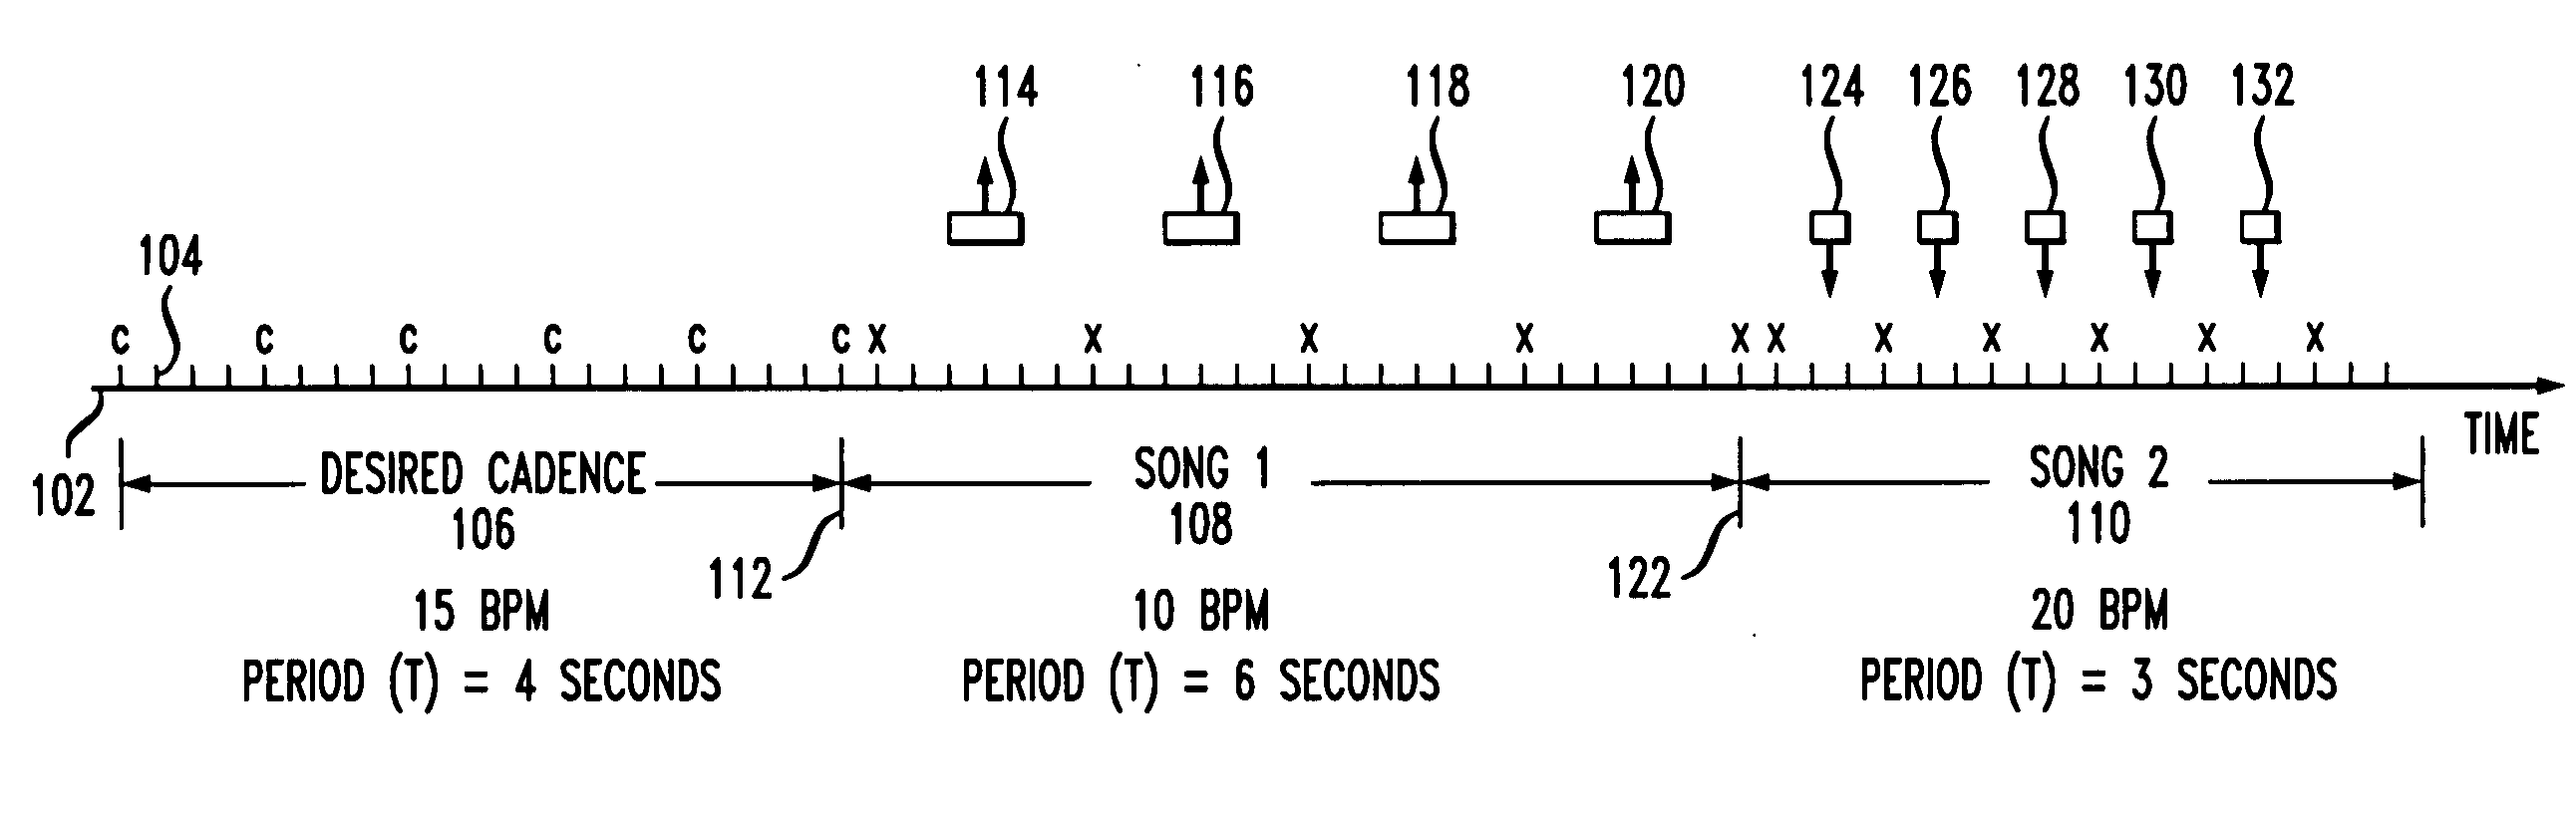 Method and apparatus for adjusting the cadence of music on a personal audio device